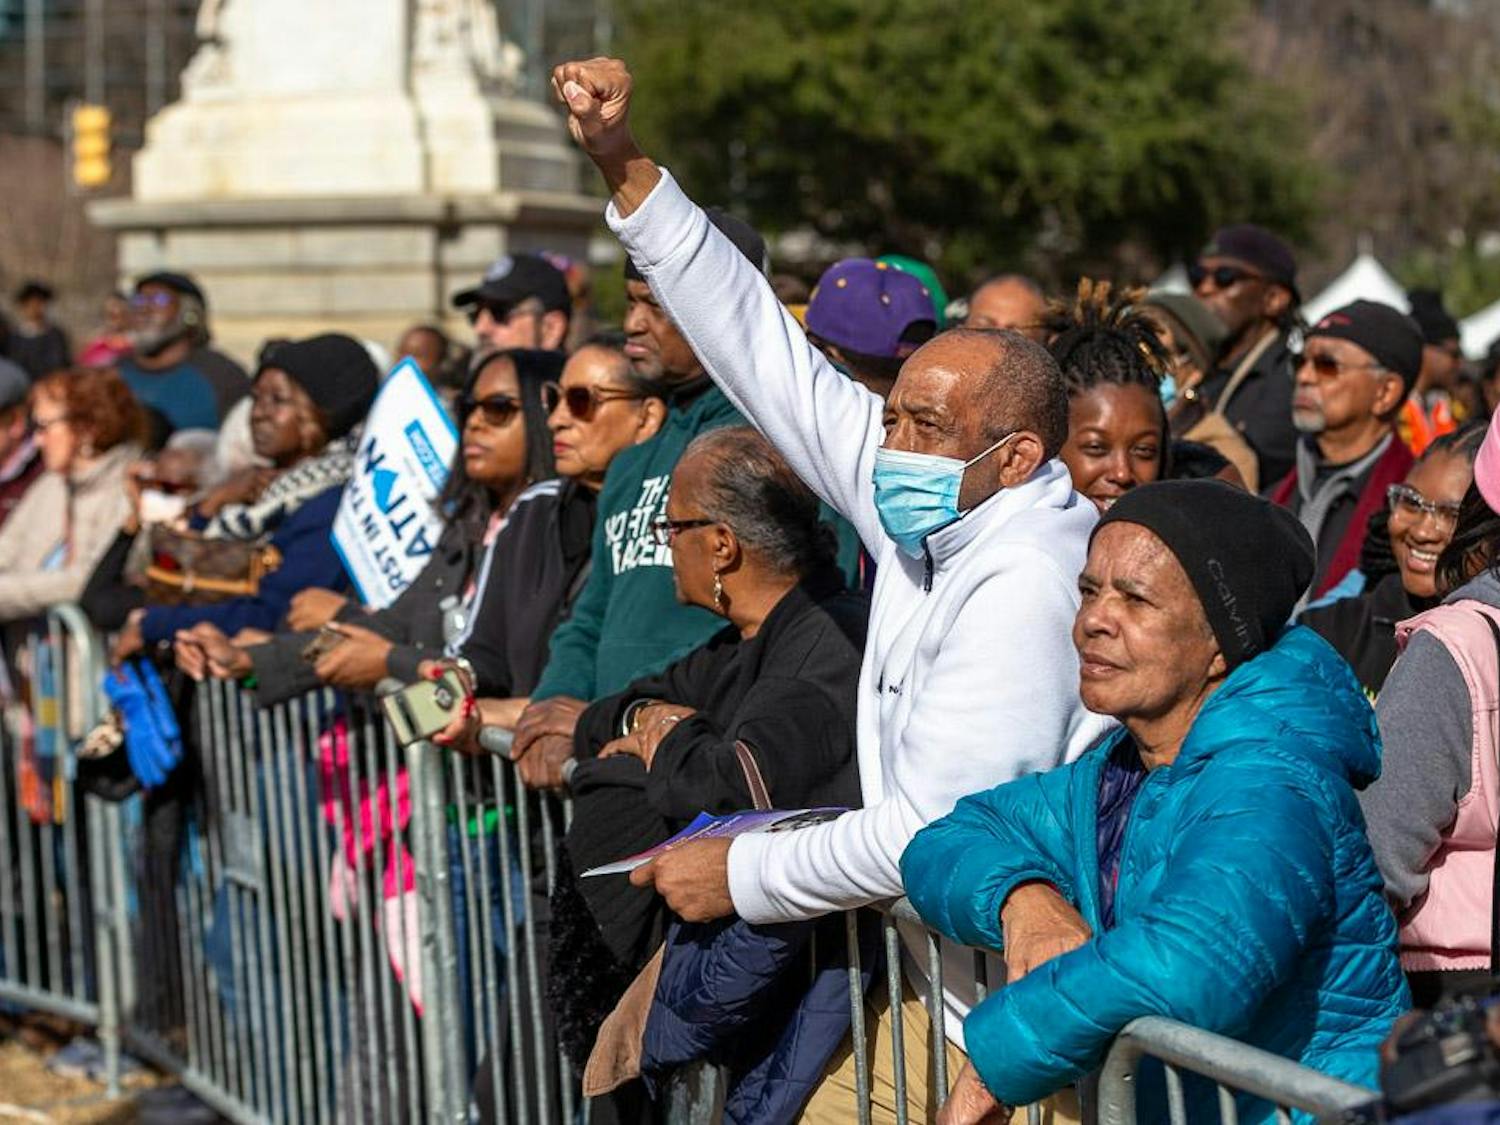 Clarence Jenkins Jr., 53, raises his fist in solidarity during the King Day at the Dome event on Jan. 15, 2024. The event featured speeches from community, state and national leaders, honoring Dr. Martin Luther King Jr. and calling for everyone to vote for freedom, justice and change.